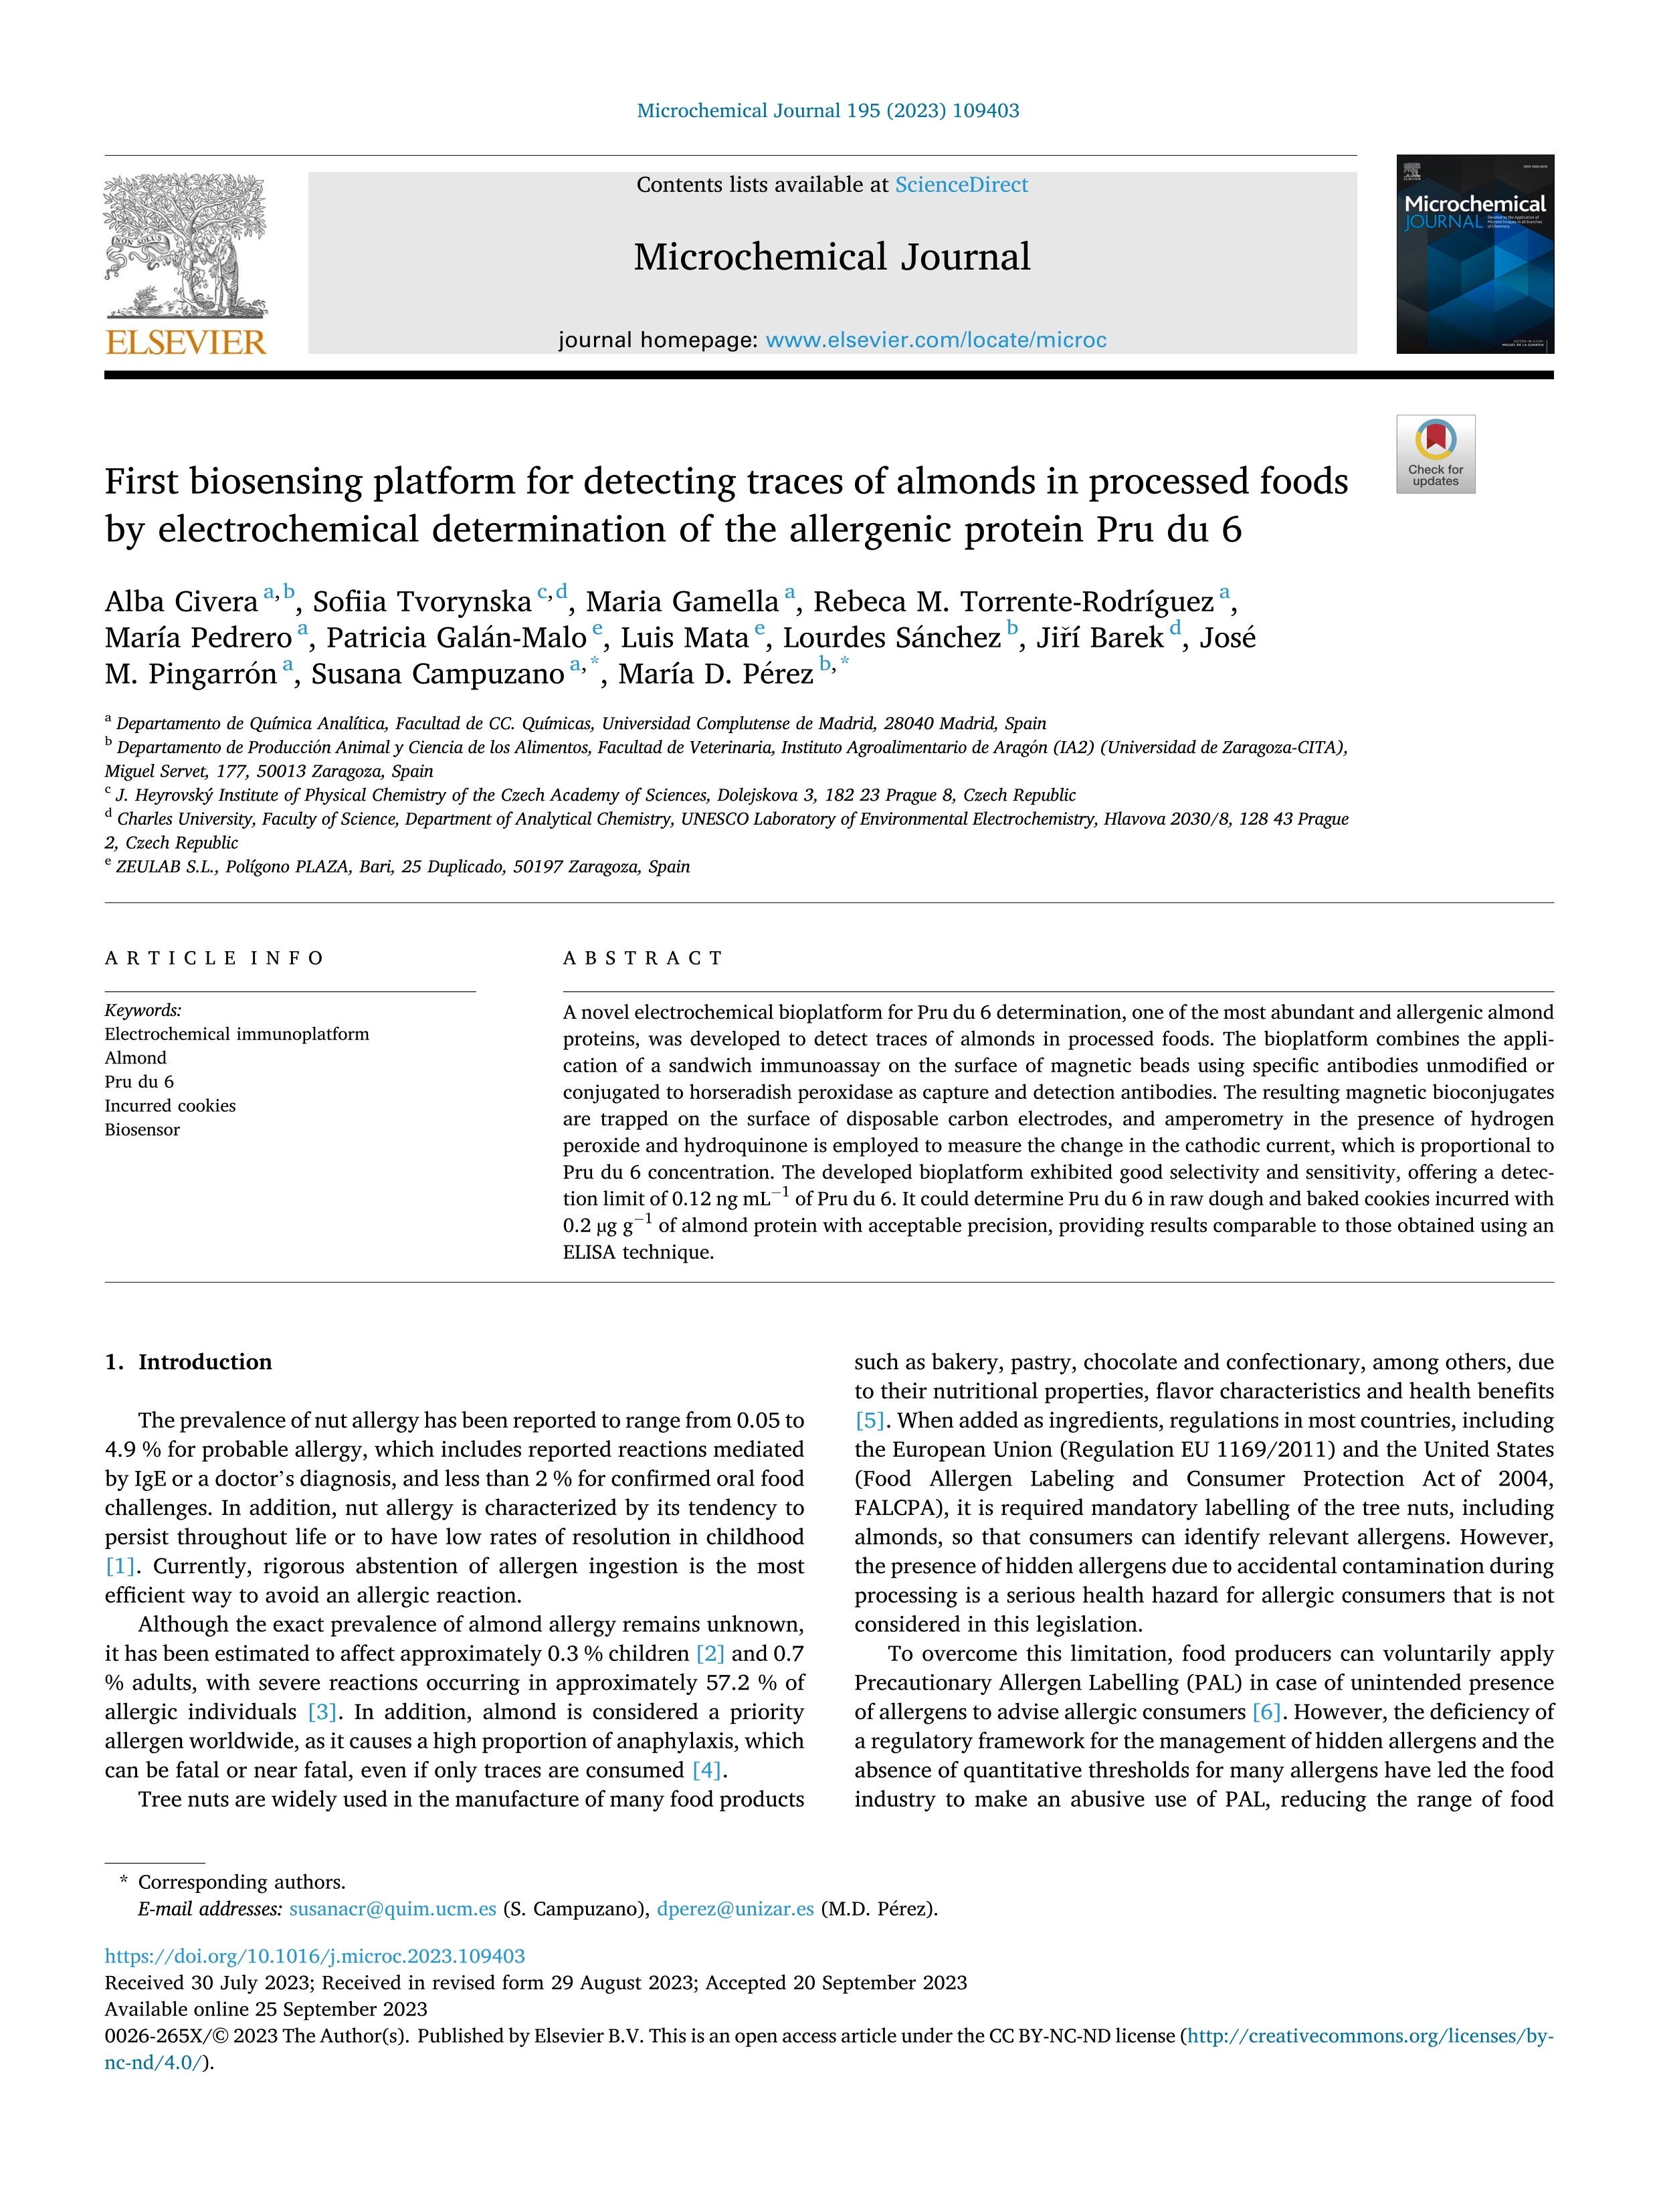 First biosensing platform for detecting traces of almonds in processed foods by electrochemical determination of the allergenic protein Pru du 6